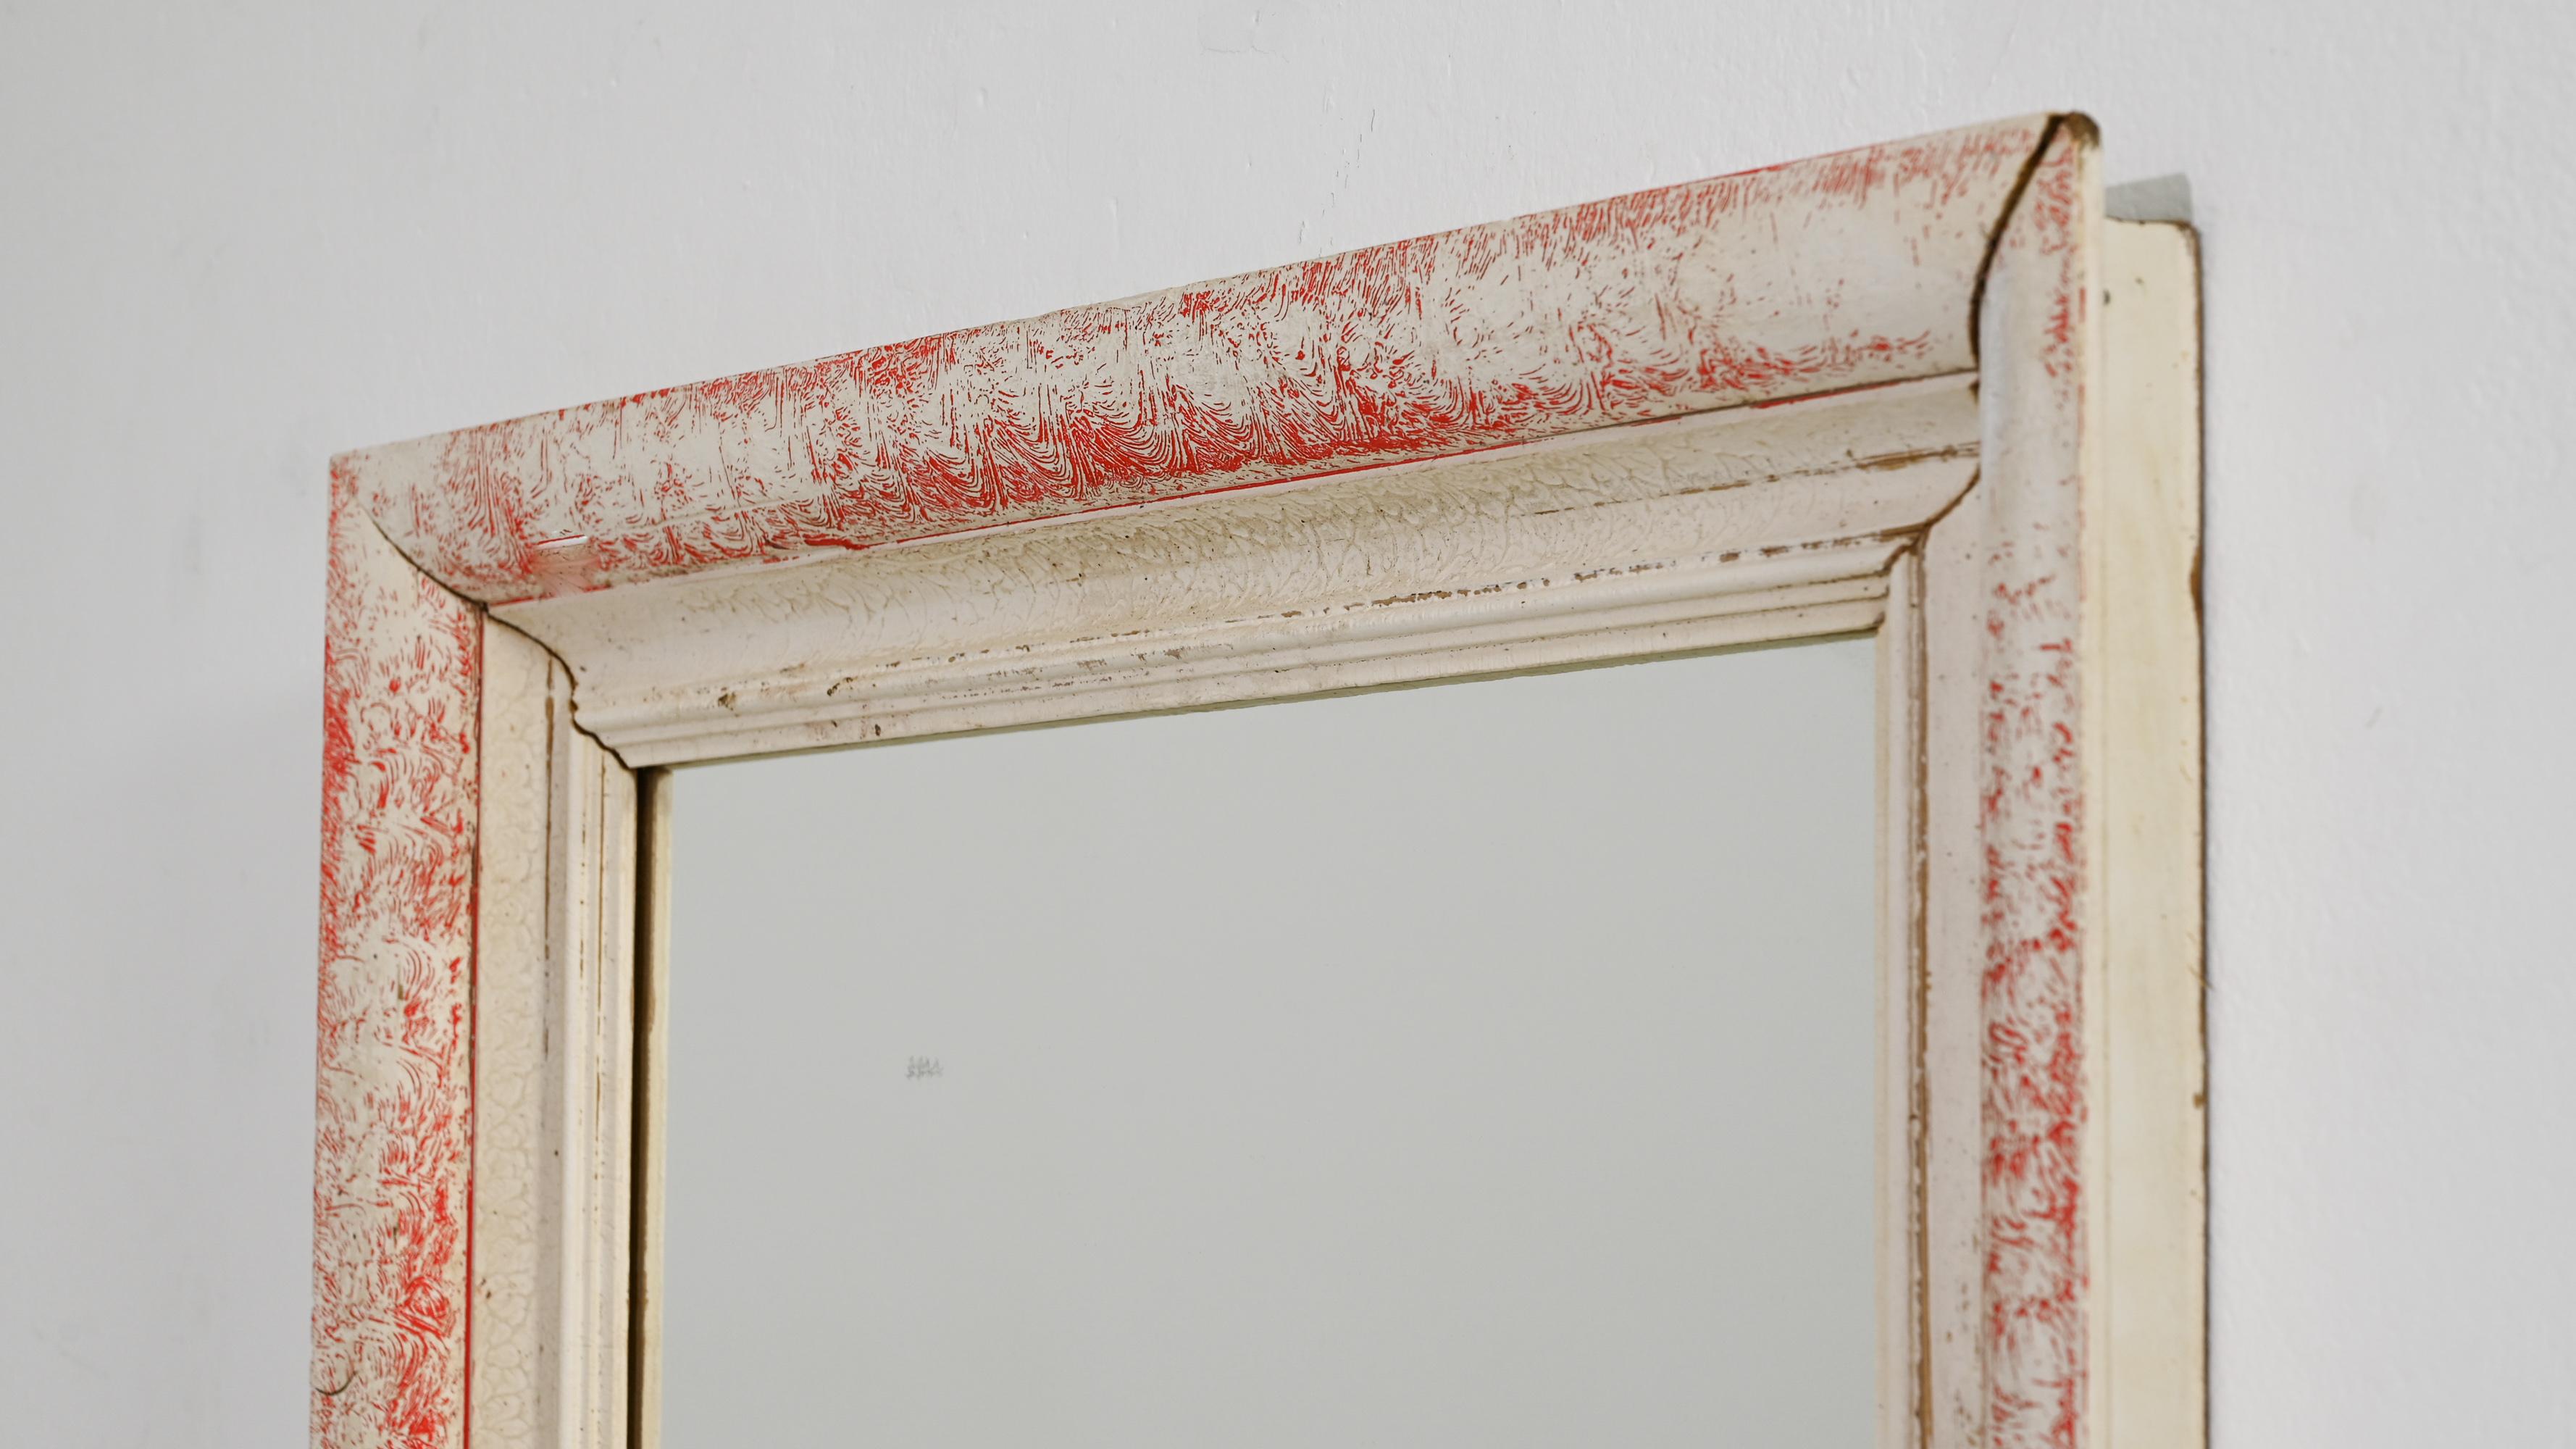 This 1940s French wood mirror exudes a serene elegance with its white patinated finish that gracefully frames the reflective glass. The distressed red undertones provide a subtle hint of color, suggesting a storied past and a rich history. This